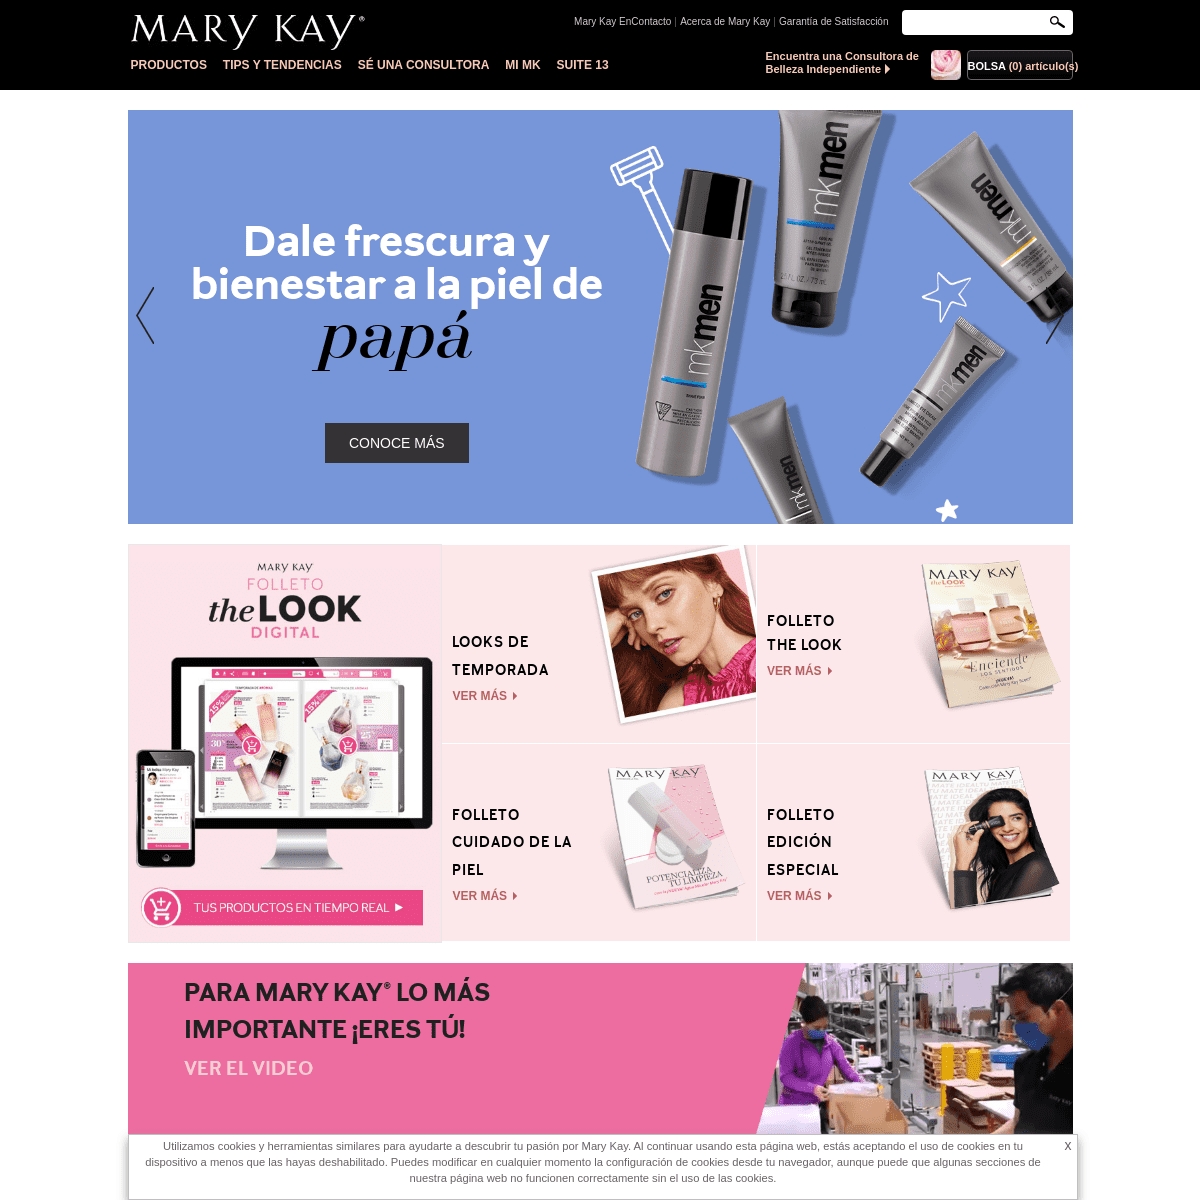 A complete backup of https://marykay.com.mx